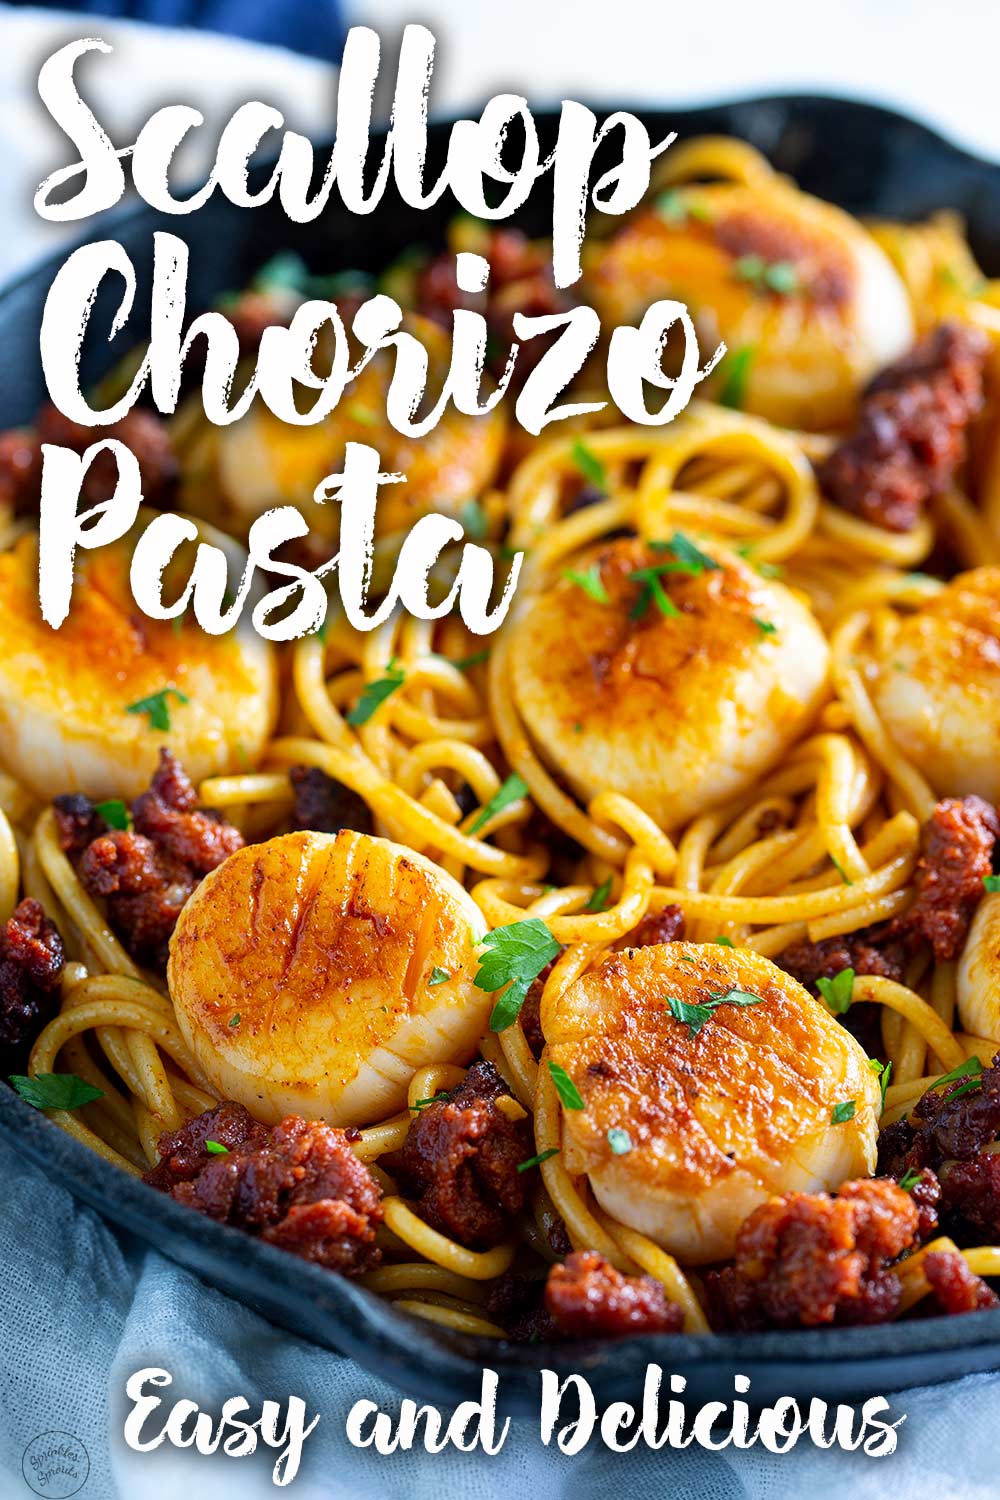 a picture of the scallop chorizo pasta, with text overlay for using on pinterest